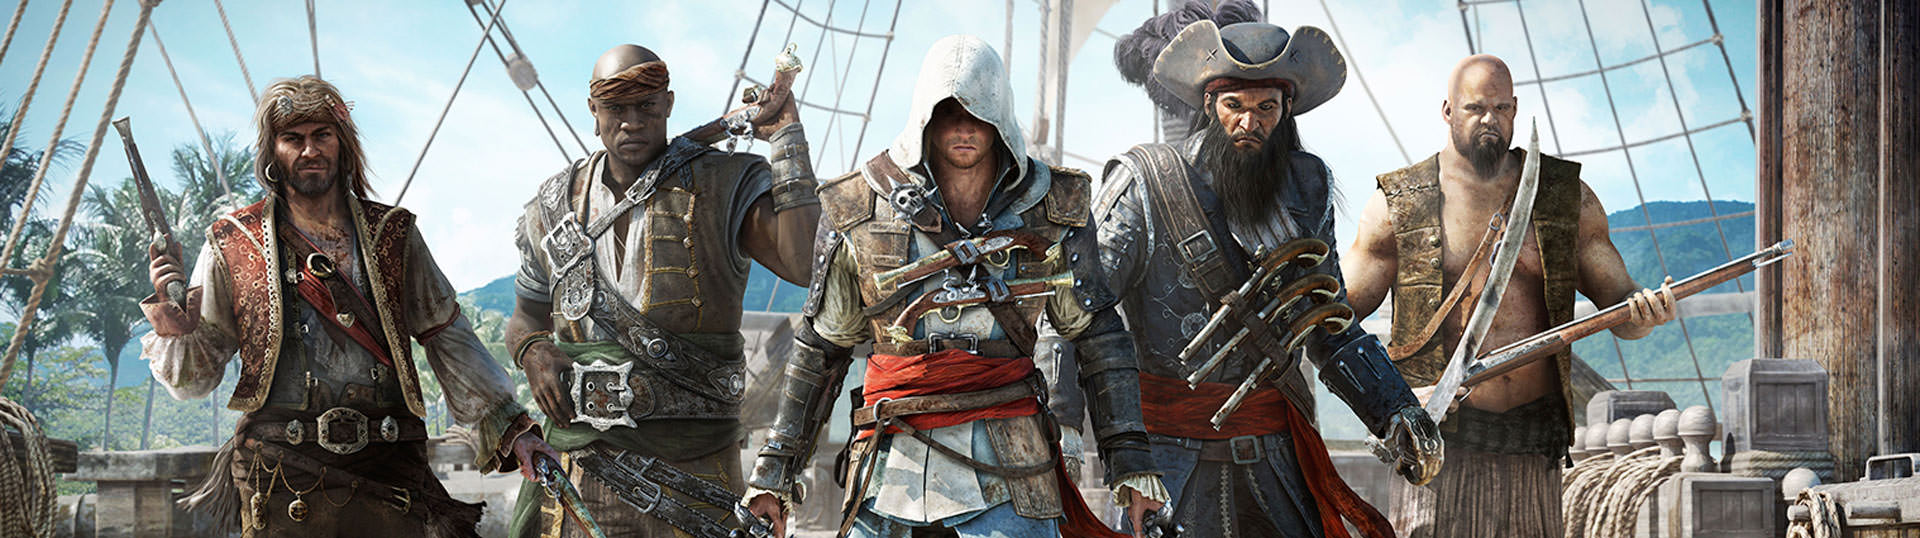 Assassin's Creed IV: Black Flag System Requirements